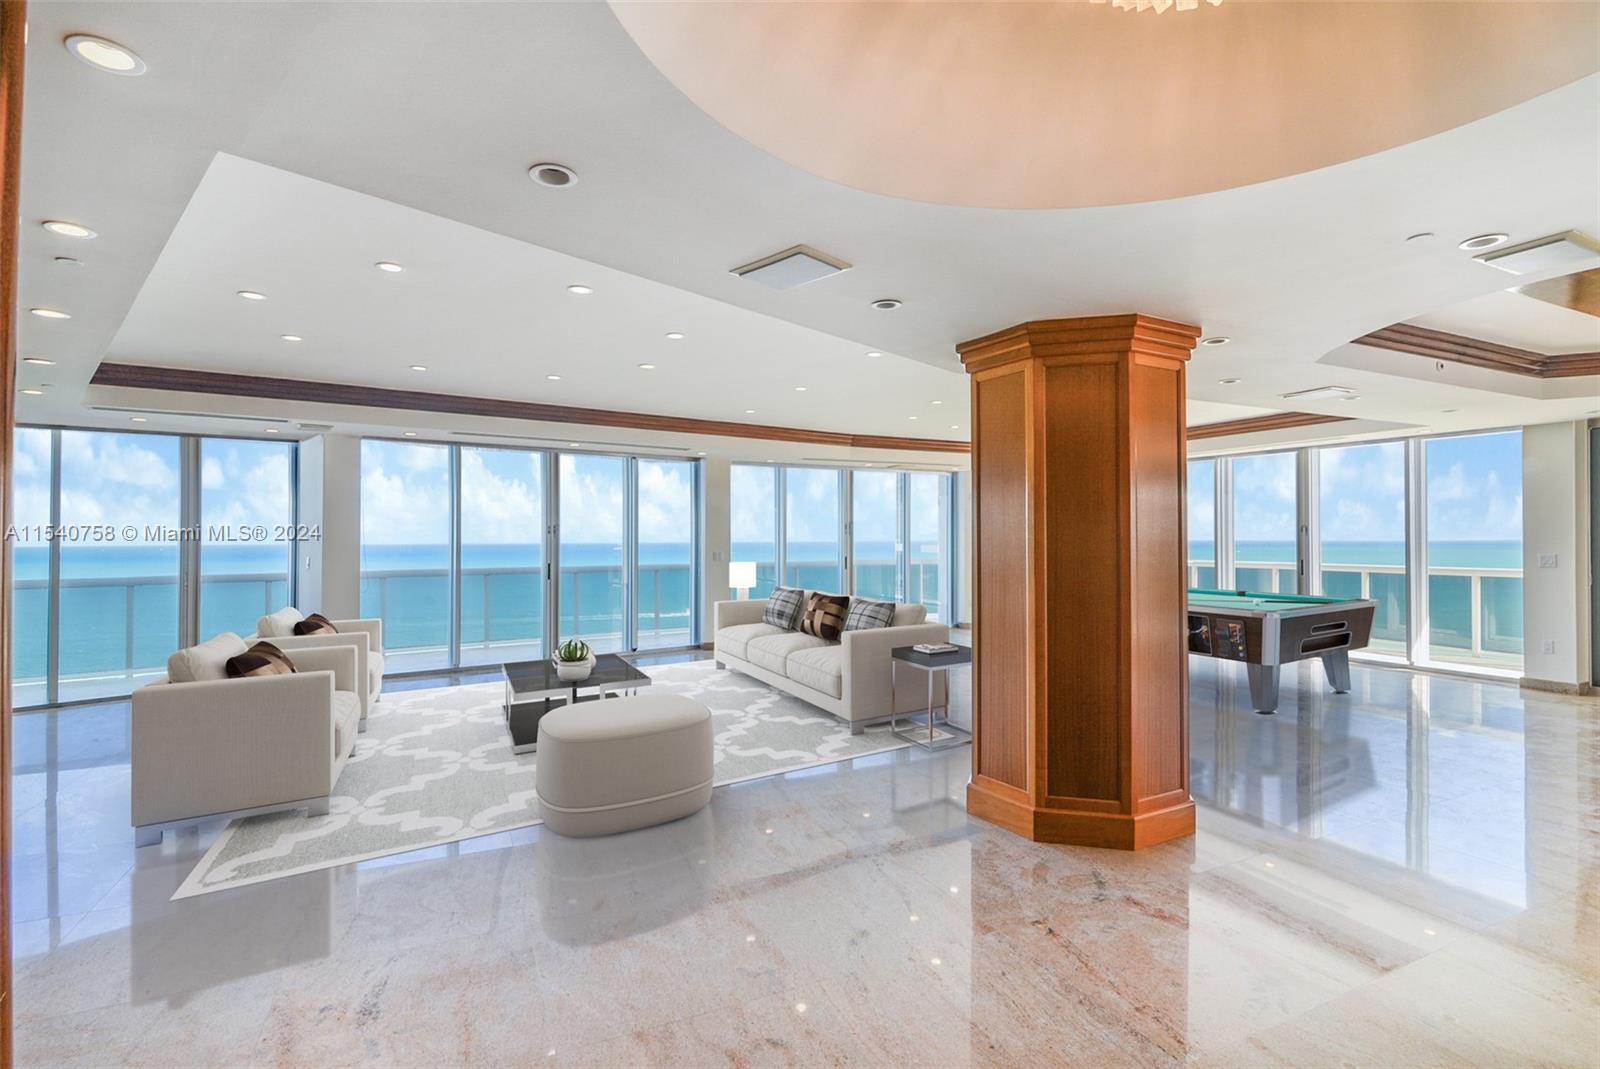 The biggest Penthouse unit in Bal Harbour. More than 5,000 sq. ft. of breathtaking views! 
This unique opportunity to live in one of the most prestigious buildings in Bal Harbour - The Majestic Tower! This full-service, private elevator building has exceptional services and amenities - fitness, spa, pool, beach service, restaurant, tennis, basketball, and security. Conveniently located next to world-famous Bal Harbour Shops.
This beautiful property is available for rent with flexible options: Seasonal Rental: $40,000; Annual Rental: $29,000